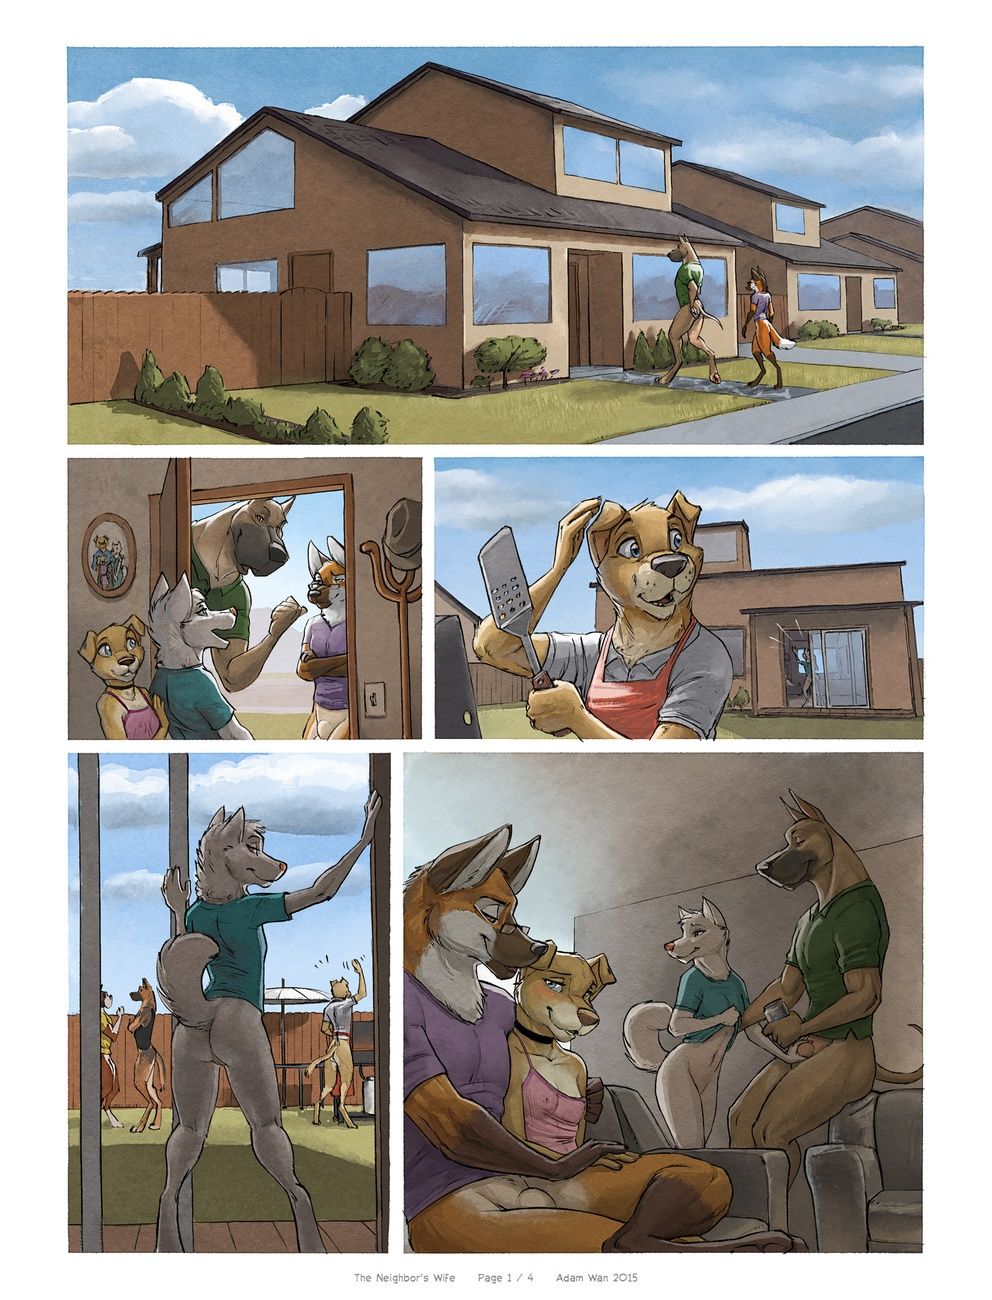 The Neighbors Wife page 1